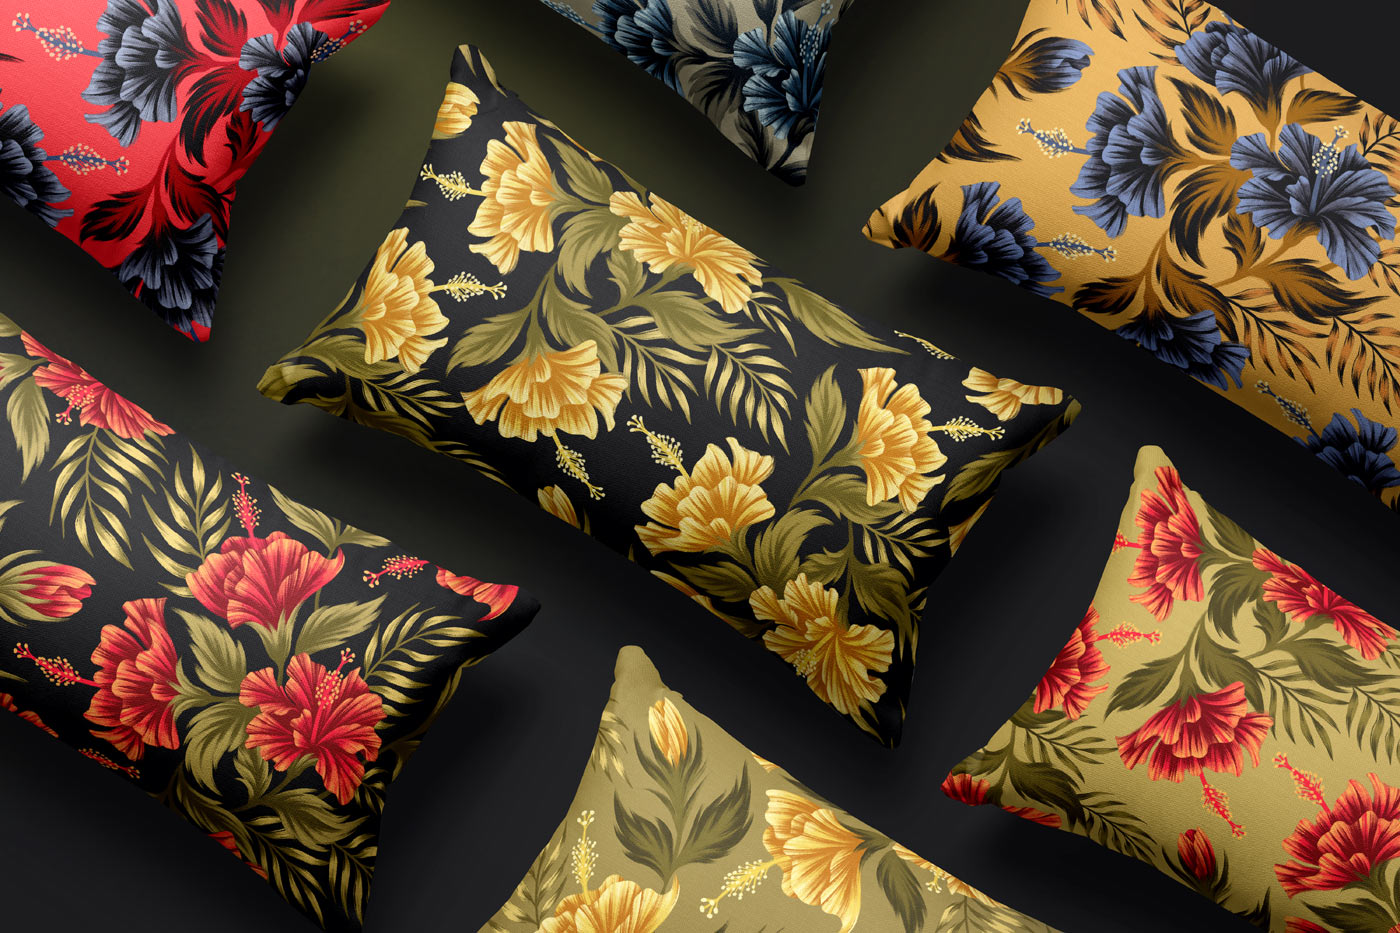 Tropical floral hibiscus pattern linen pillows by Andrea Muller